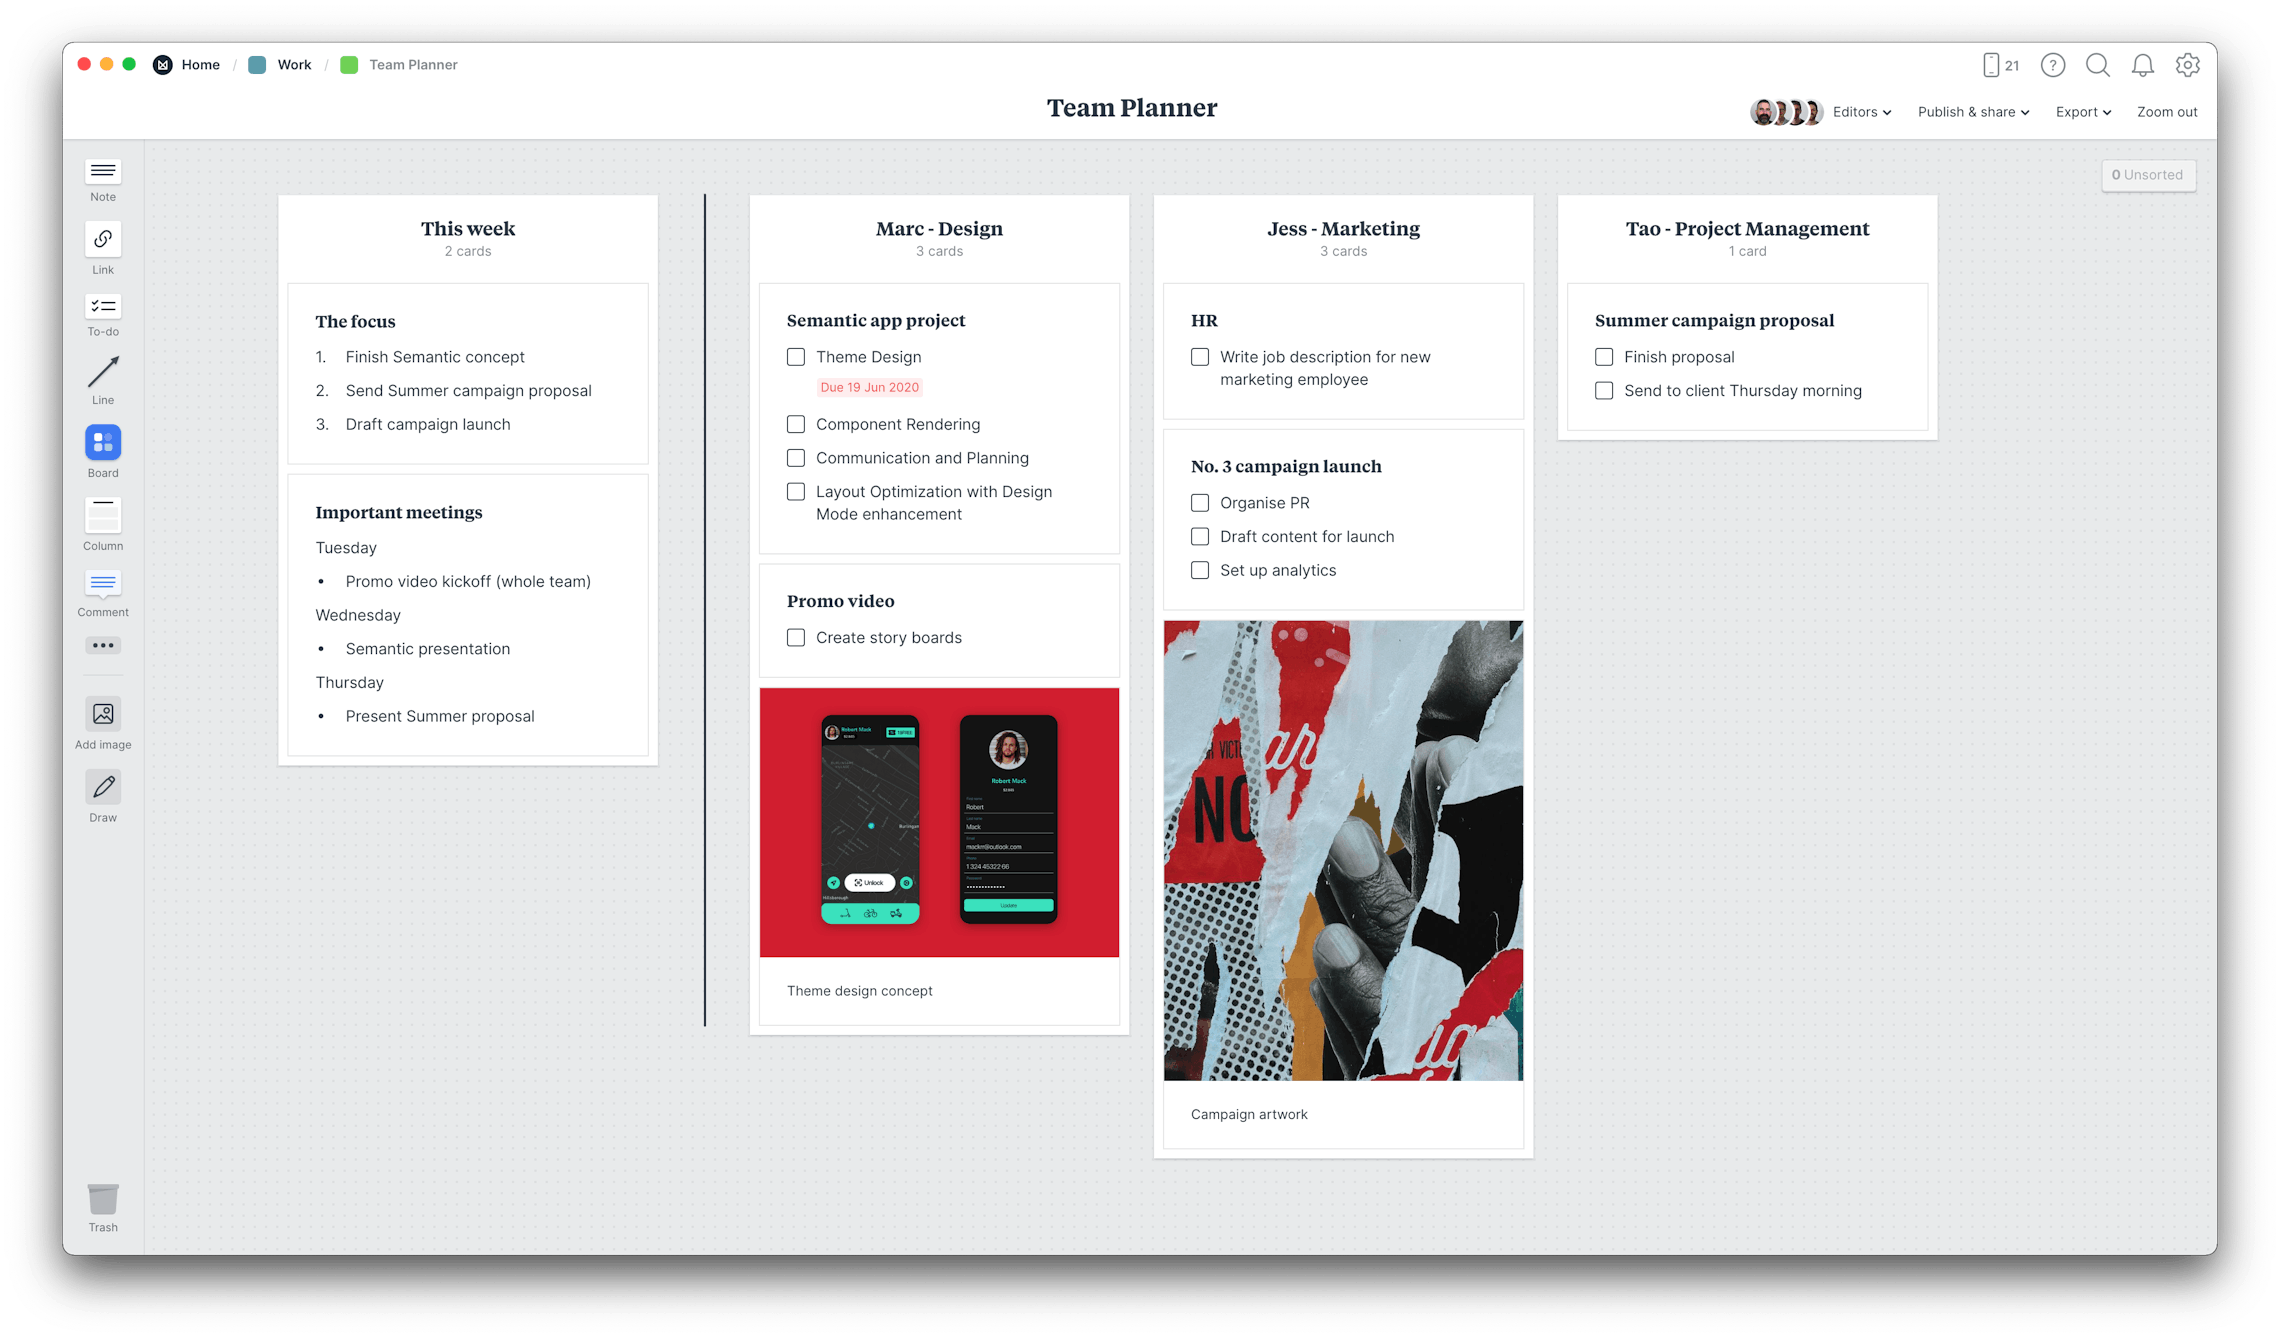 Team Planner Template, within the Milanote app